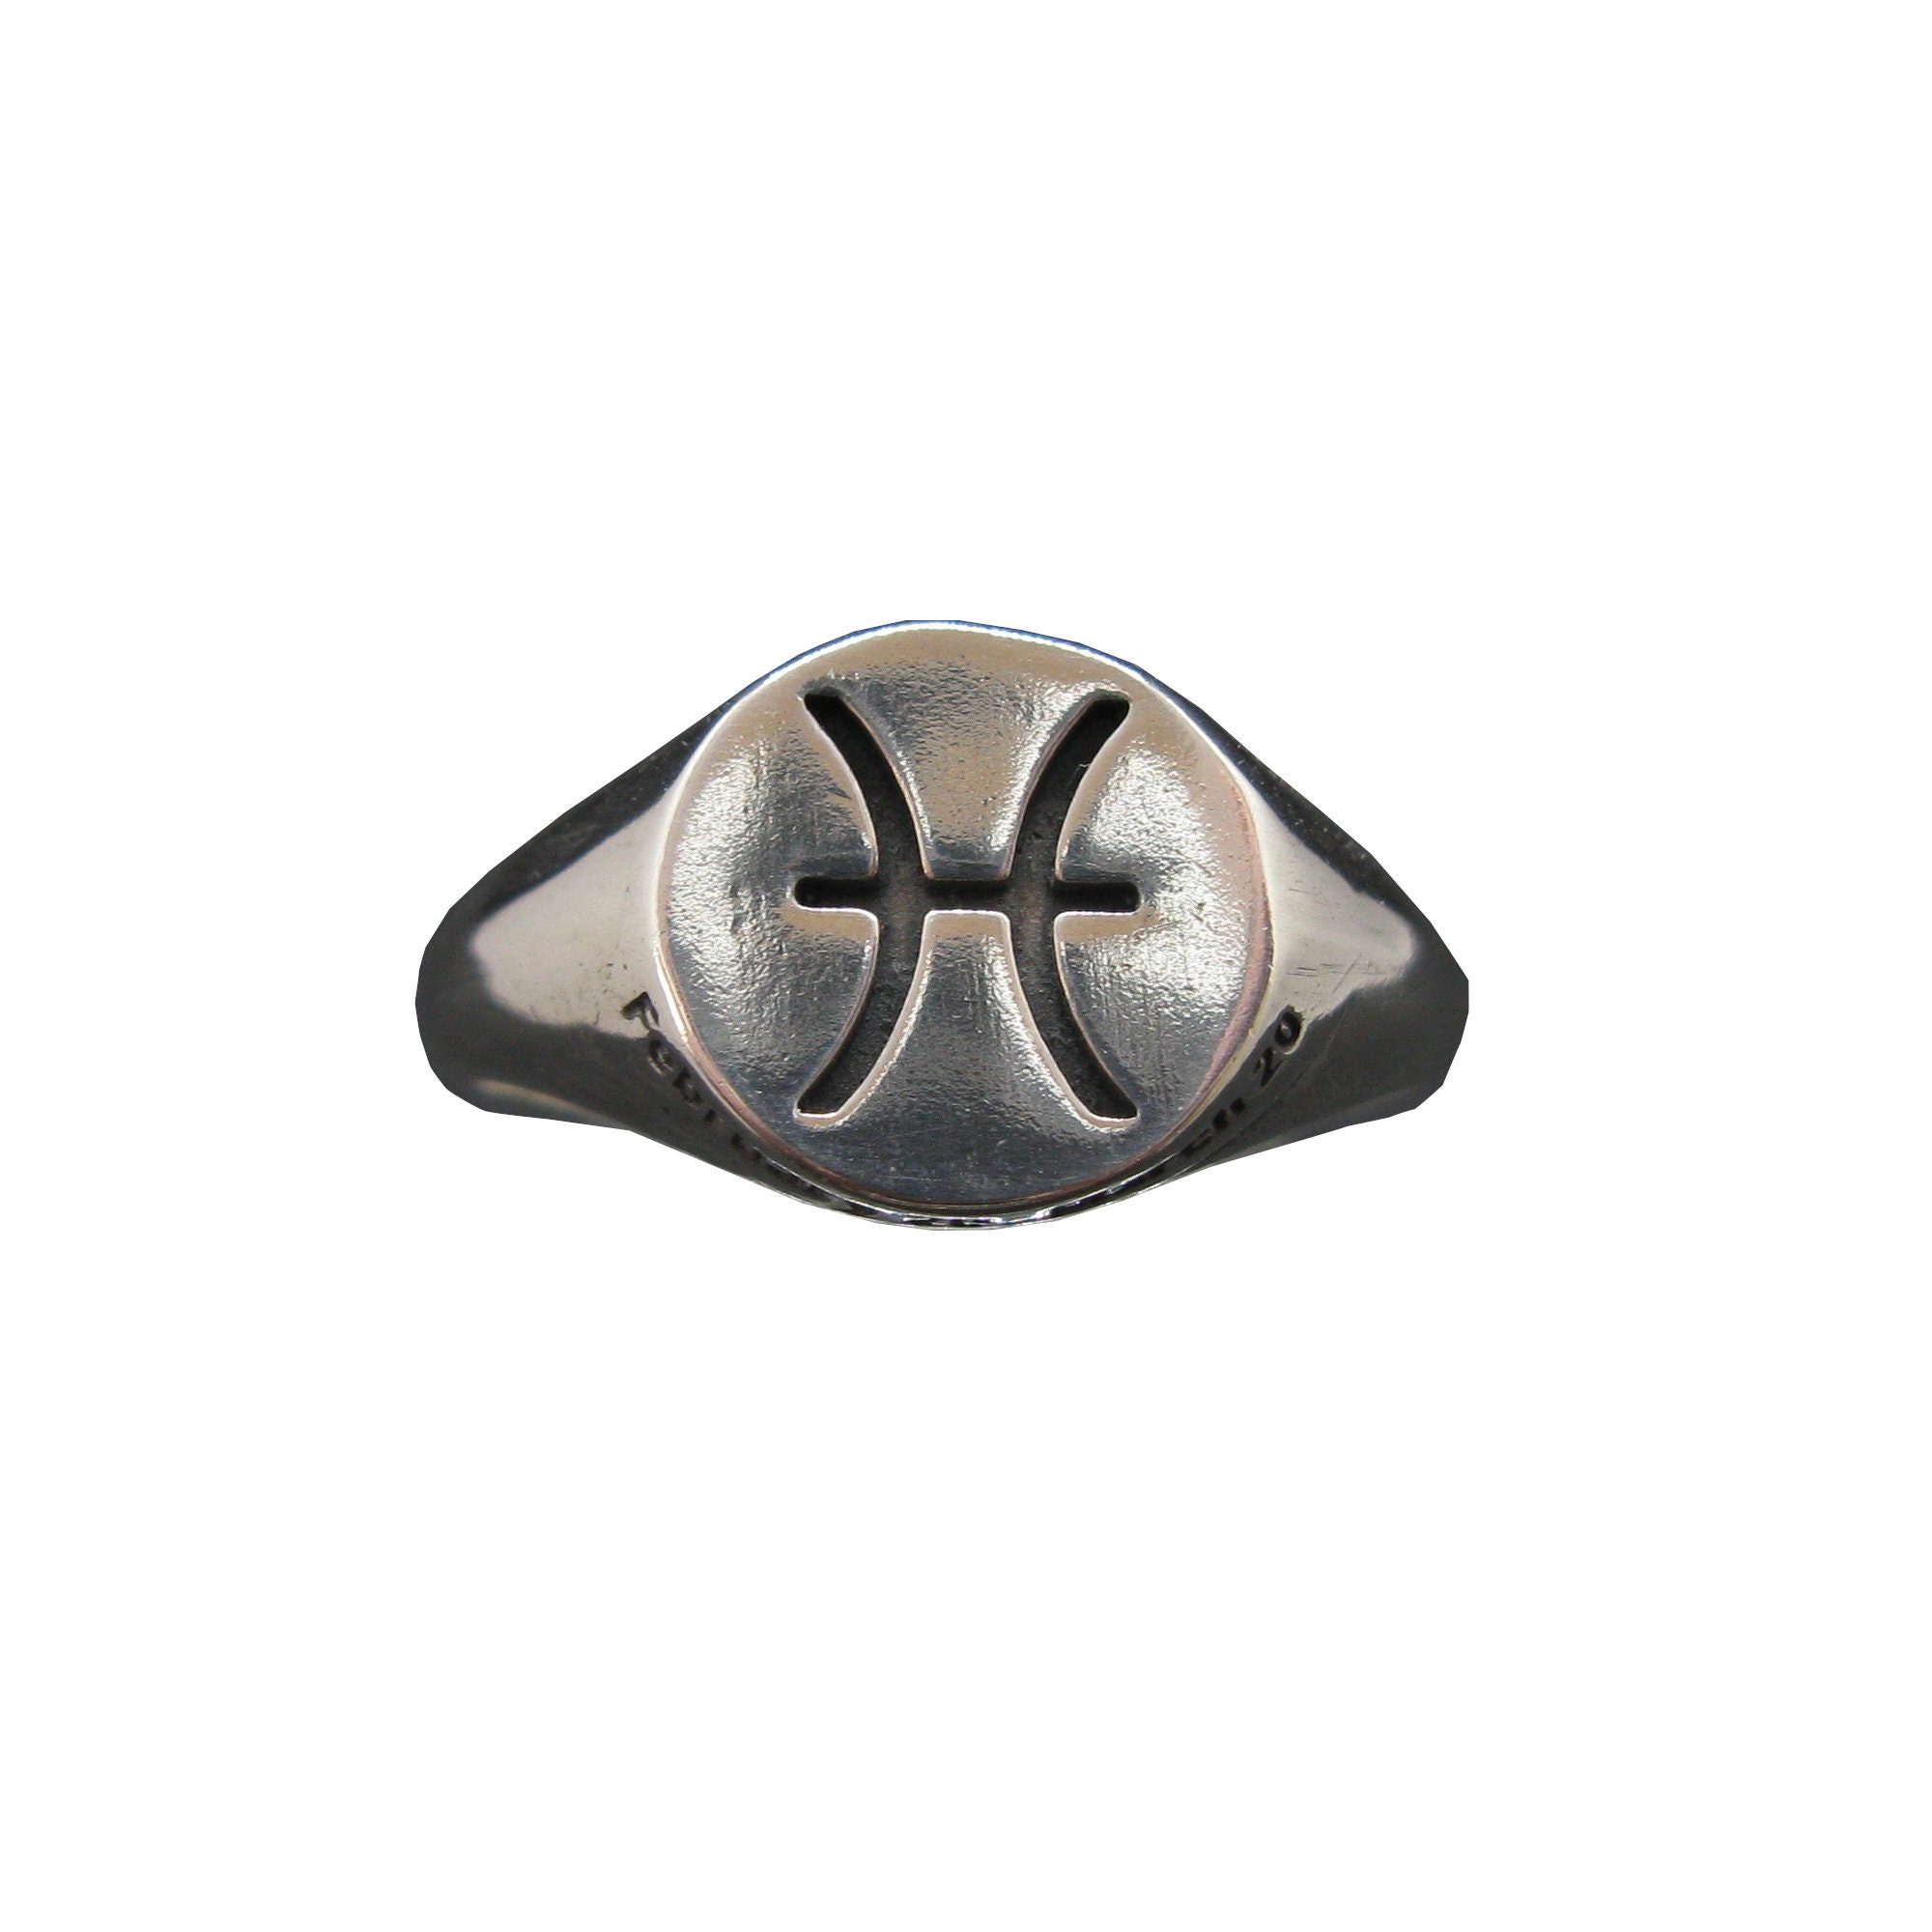 Aries Signet Ring – Across The Way